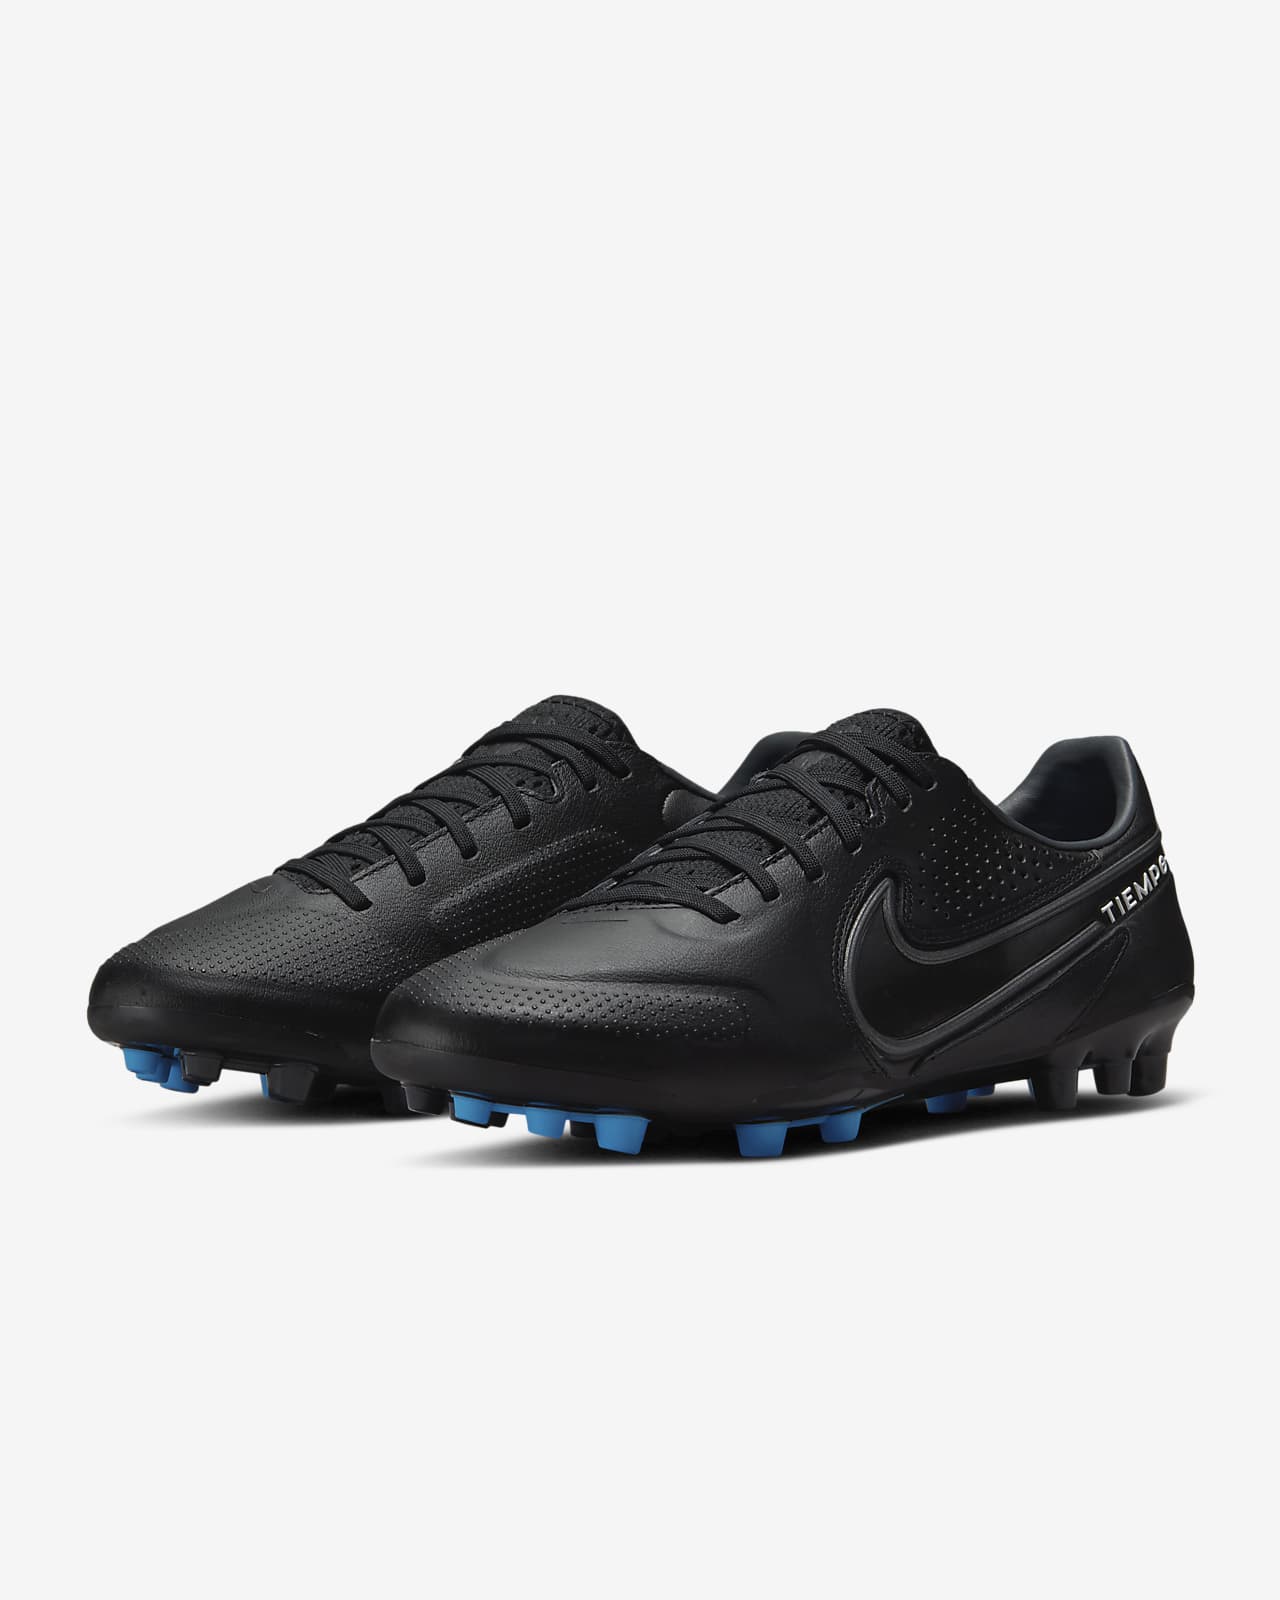 Nike Tiempo Legend 9 Pro AG-Pro Artificial-Ground Football Boot. Nike CZ